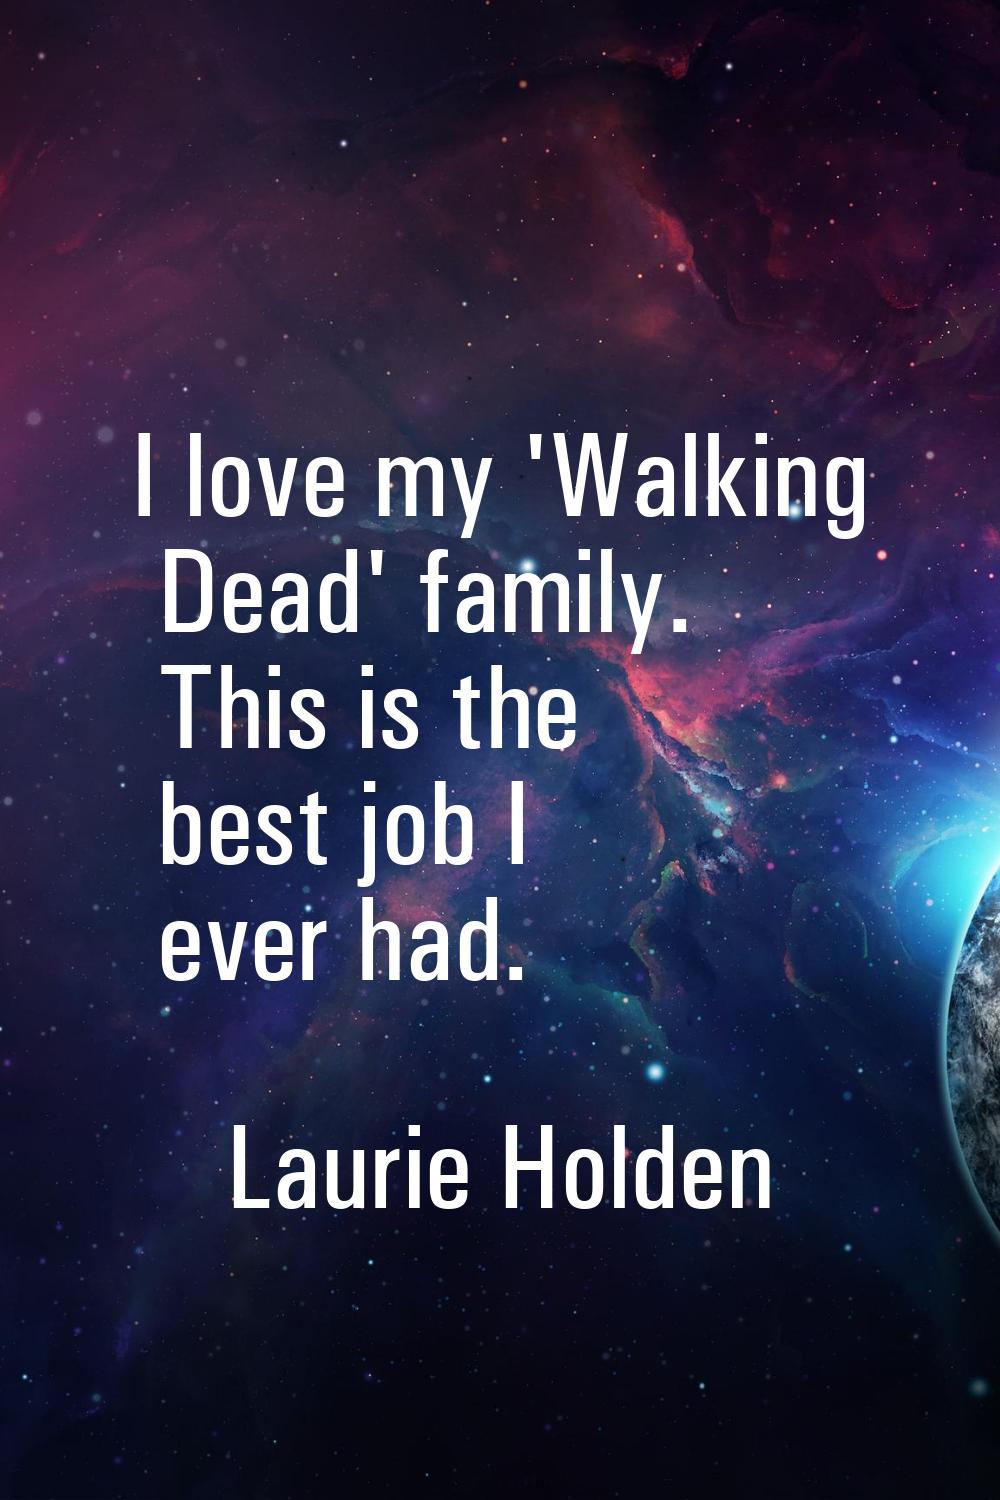 I love my 'Walking Dead' family. This is the best job I ever had.